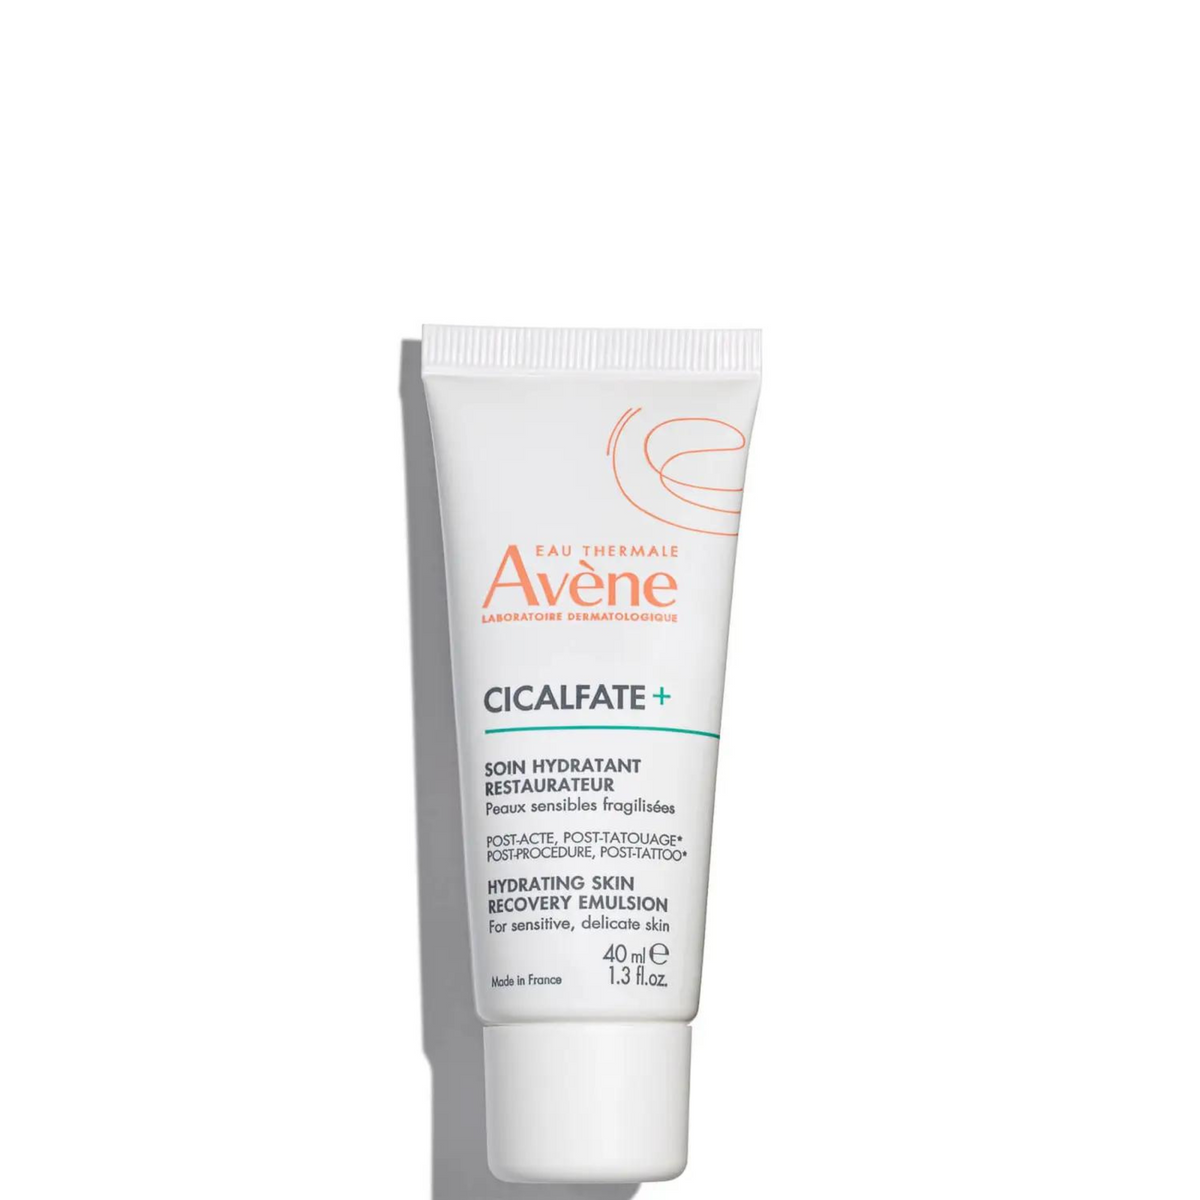 Primary Image of Eau Thermale Avene Cicalfate + Hydrating Emulsion (1.3 fl oz)